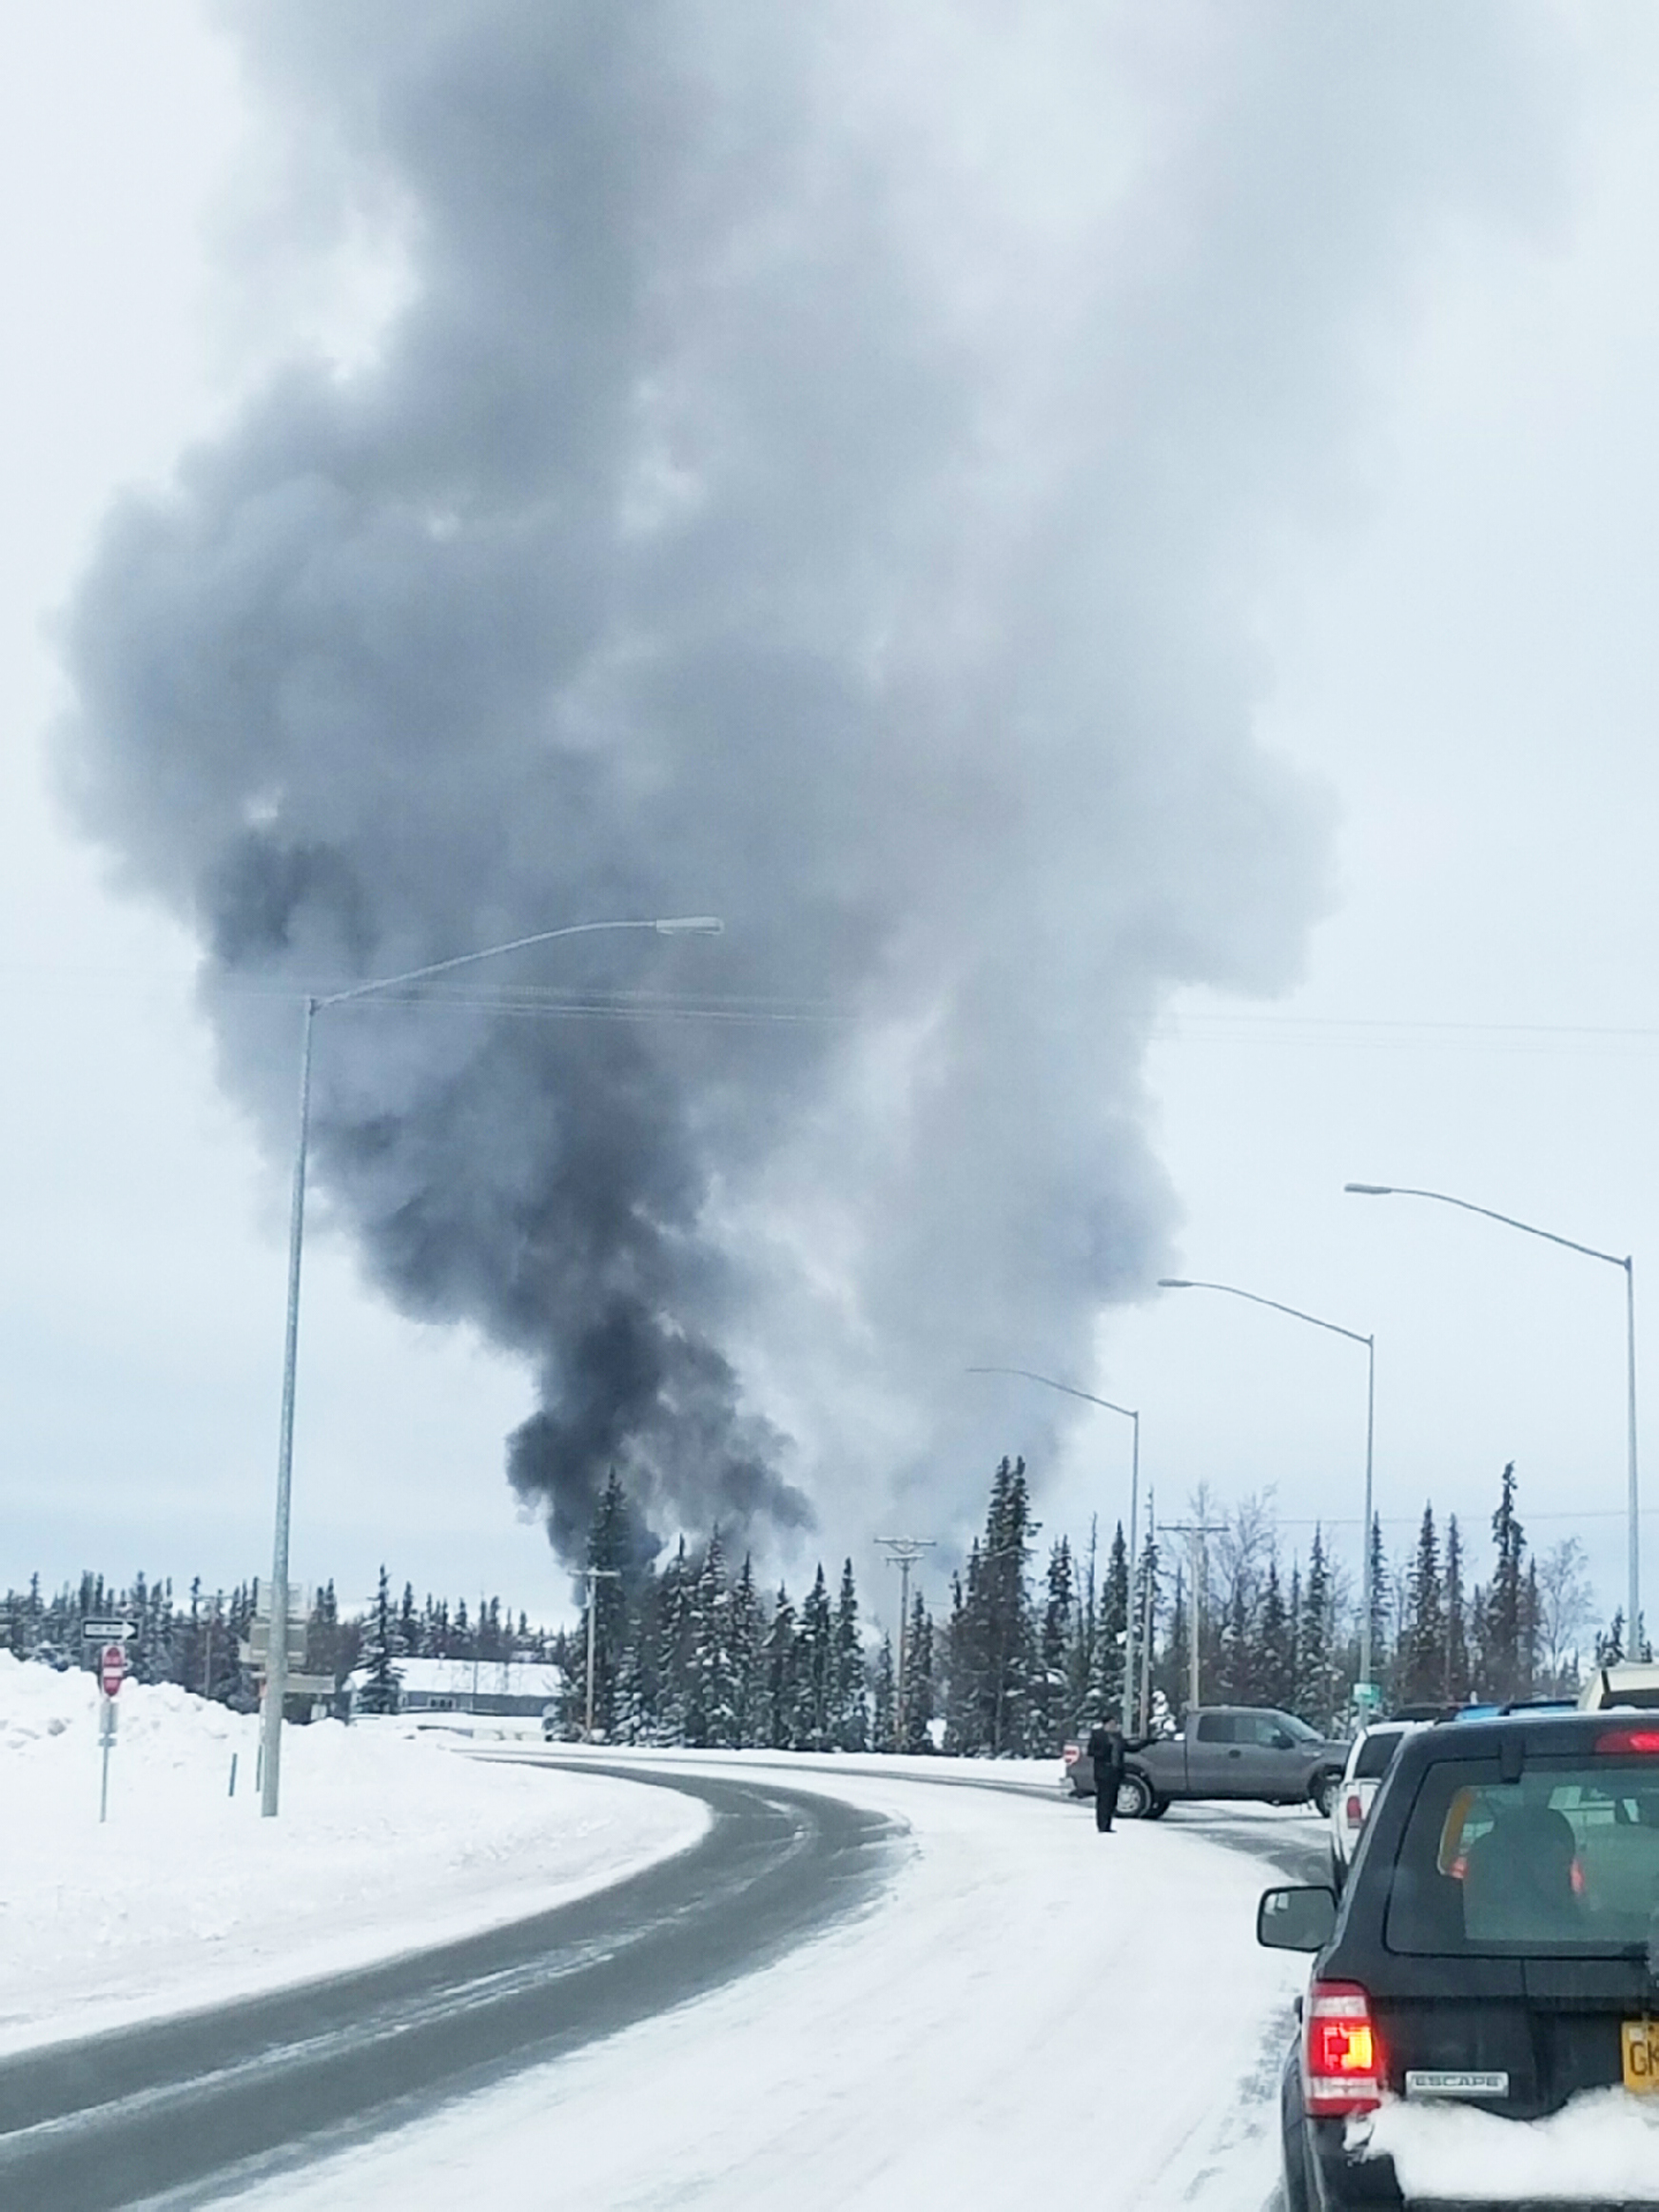 Smoke billows into the air from the scene of a structure fire Wednesday, Feb. 22, 2017 on Bridge Access Road in Kenai, Alaska. (Photo courtesy Jim West)